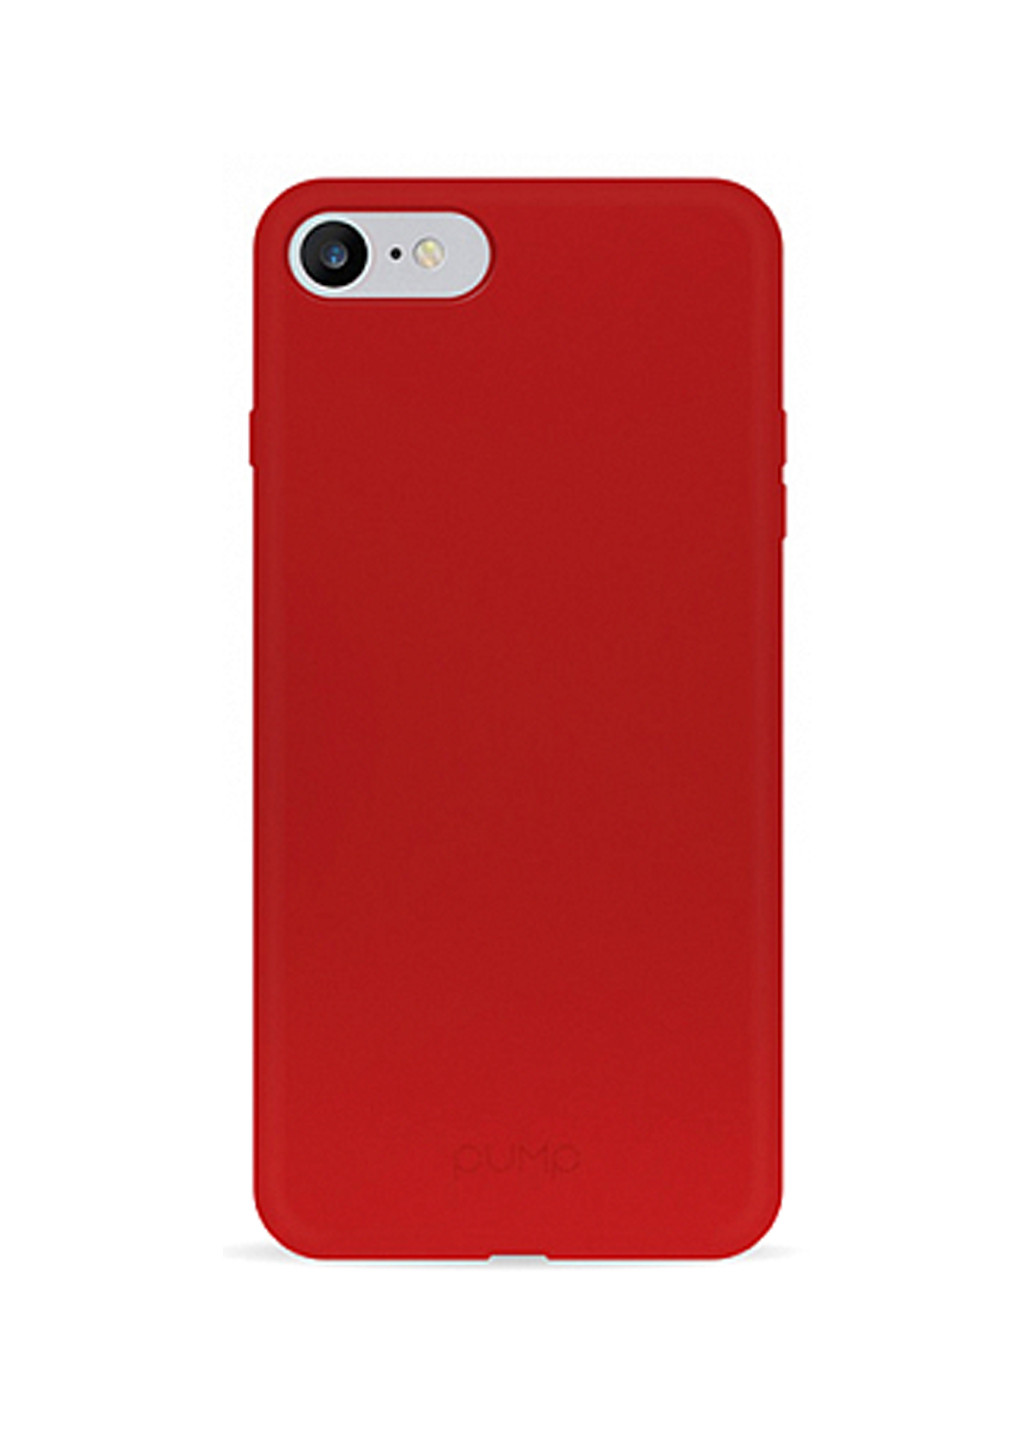 Чехол Silicone Case for iPhone 8/7 Red Pump silicone case для iphone 8/7 red (136993633)